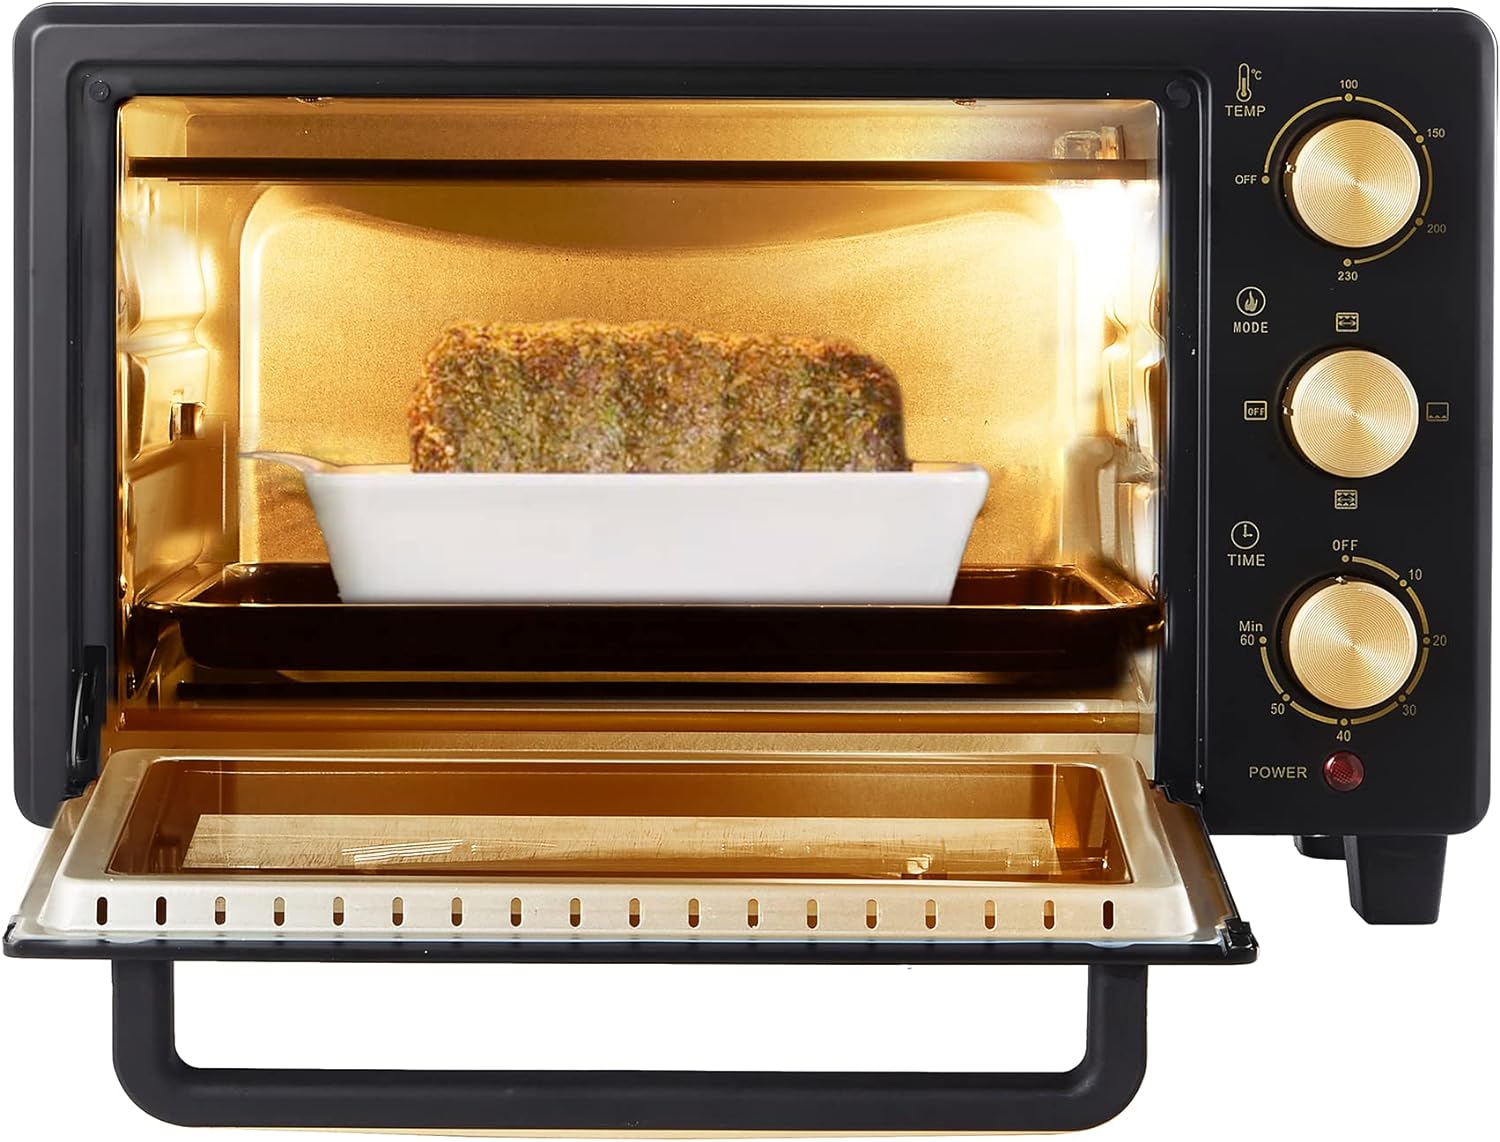 belaco 23l toaster oven review